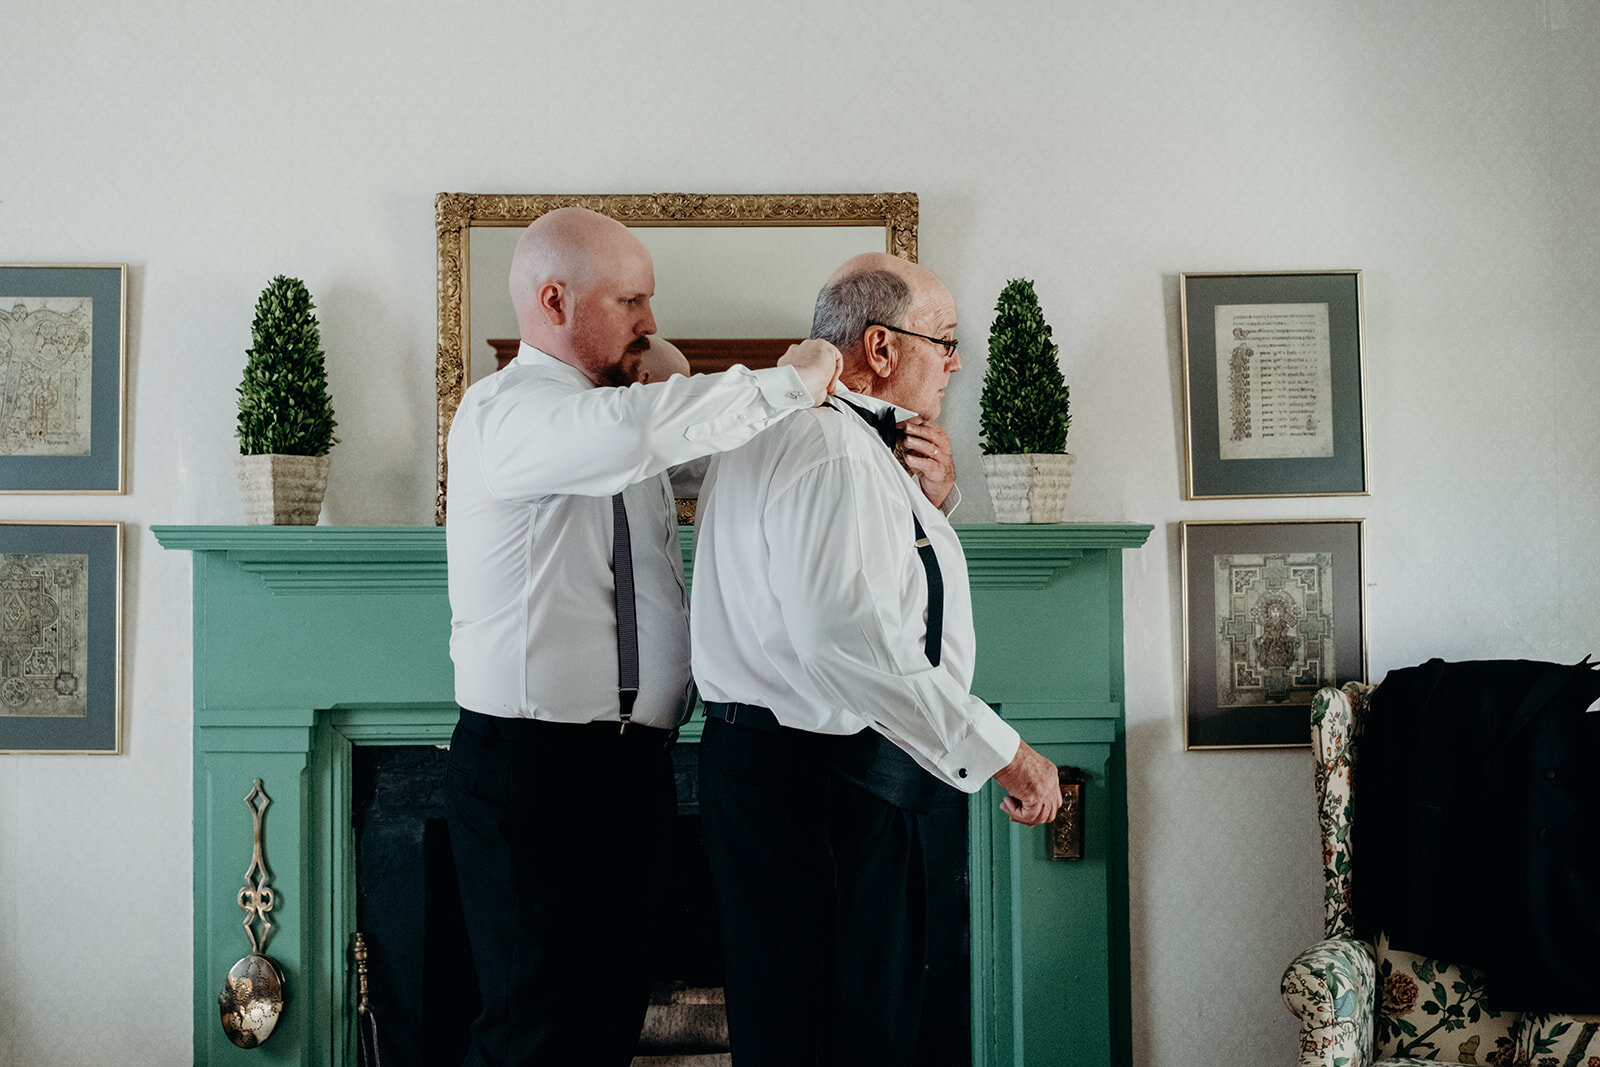 The groom helps his father with his tie before his outdoor farm wedding ceremony.